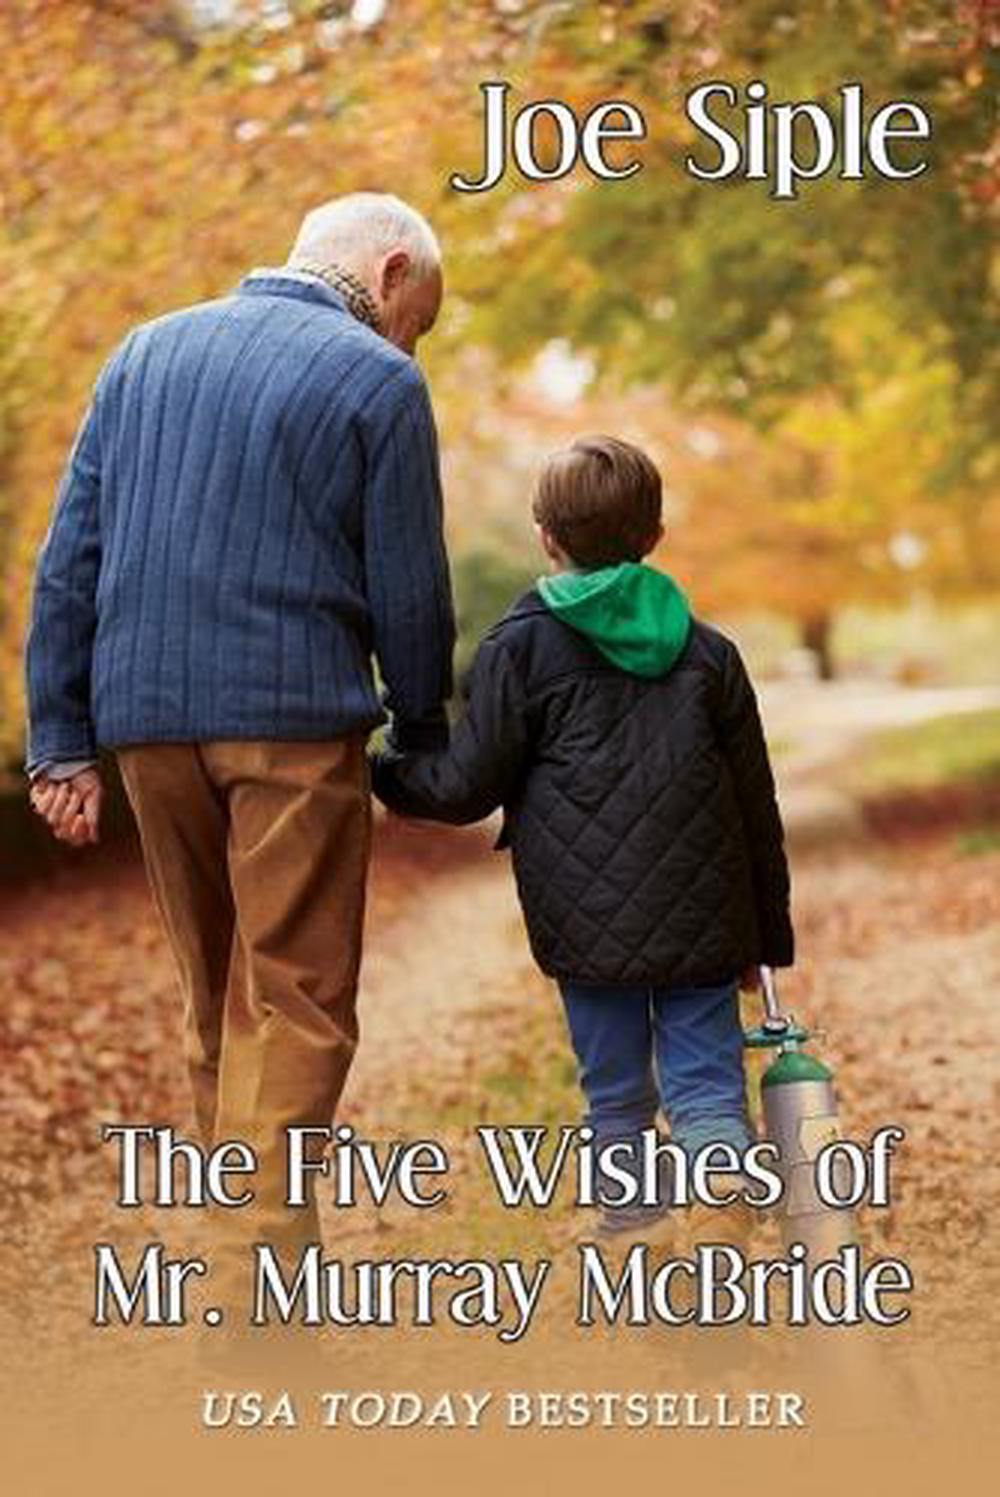 the-five-wishes-of-mr-murray-mcbride-by-joe-siple-paperback-book-free-shipping-9781684330409